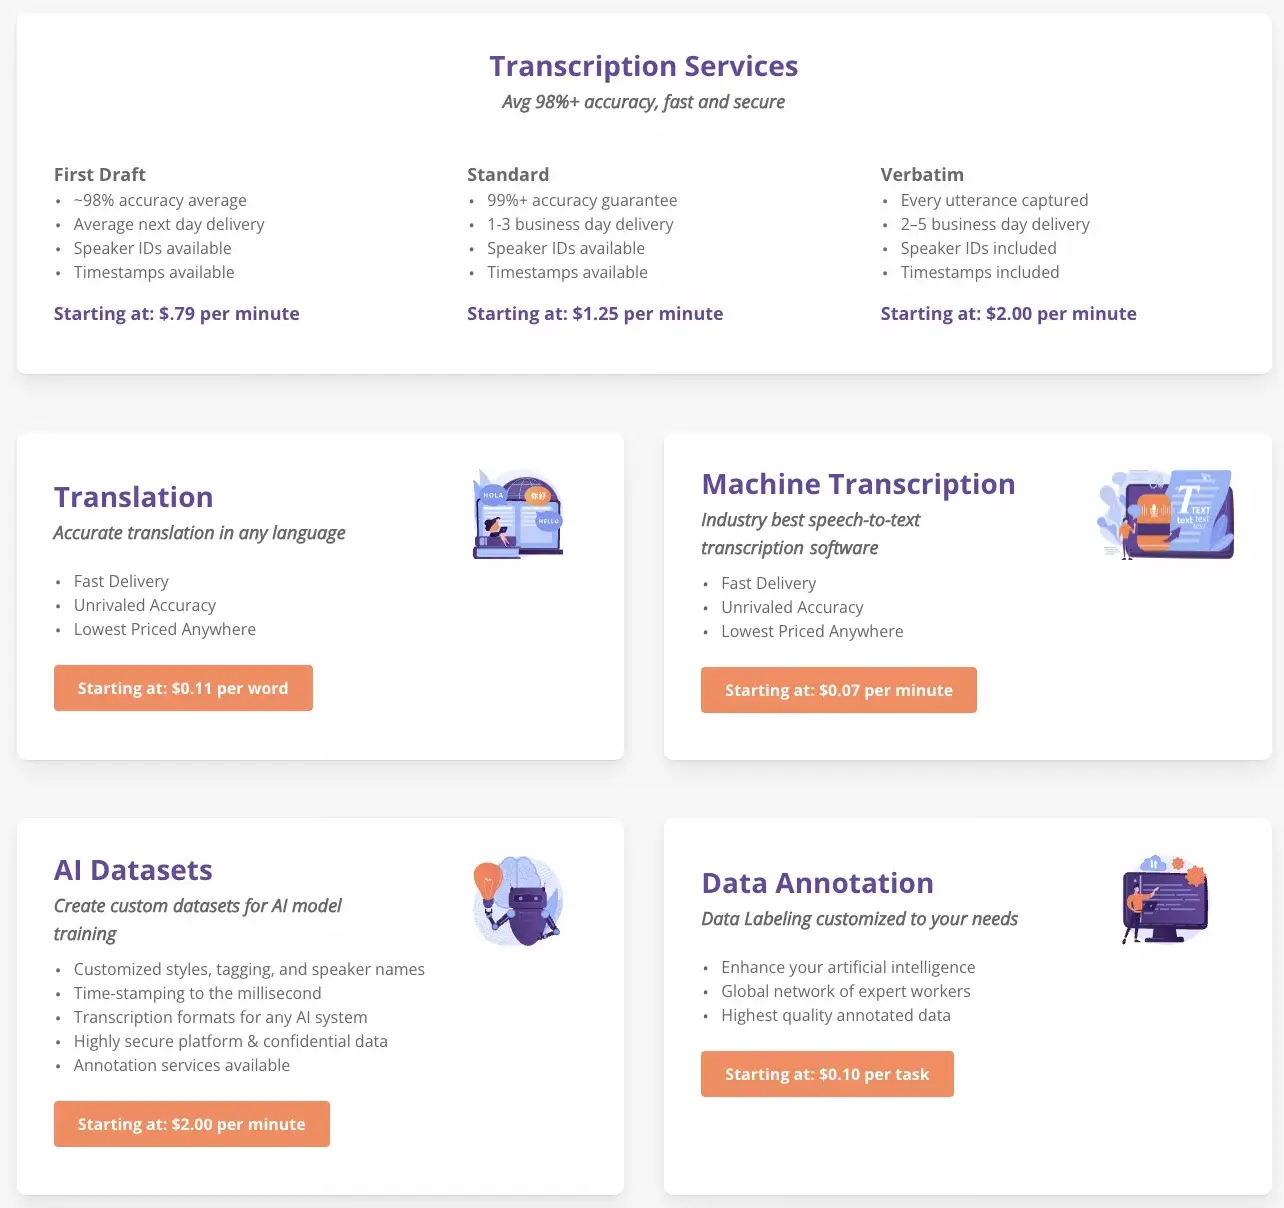 TranscribeMe Review - How Much Does TranscribeMe Cost?